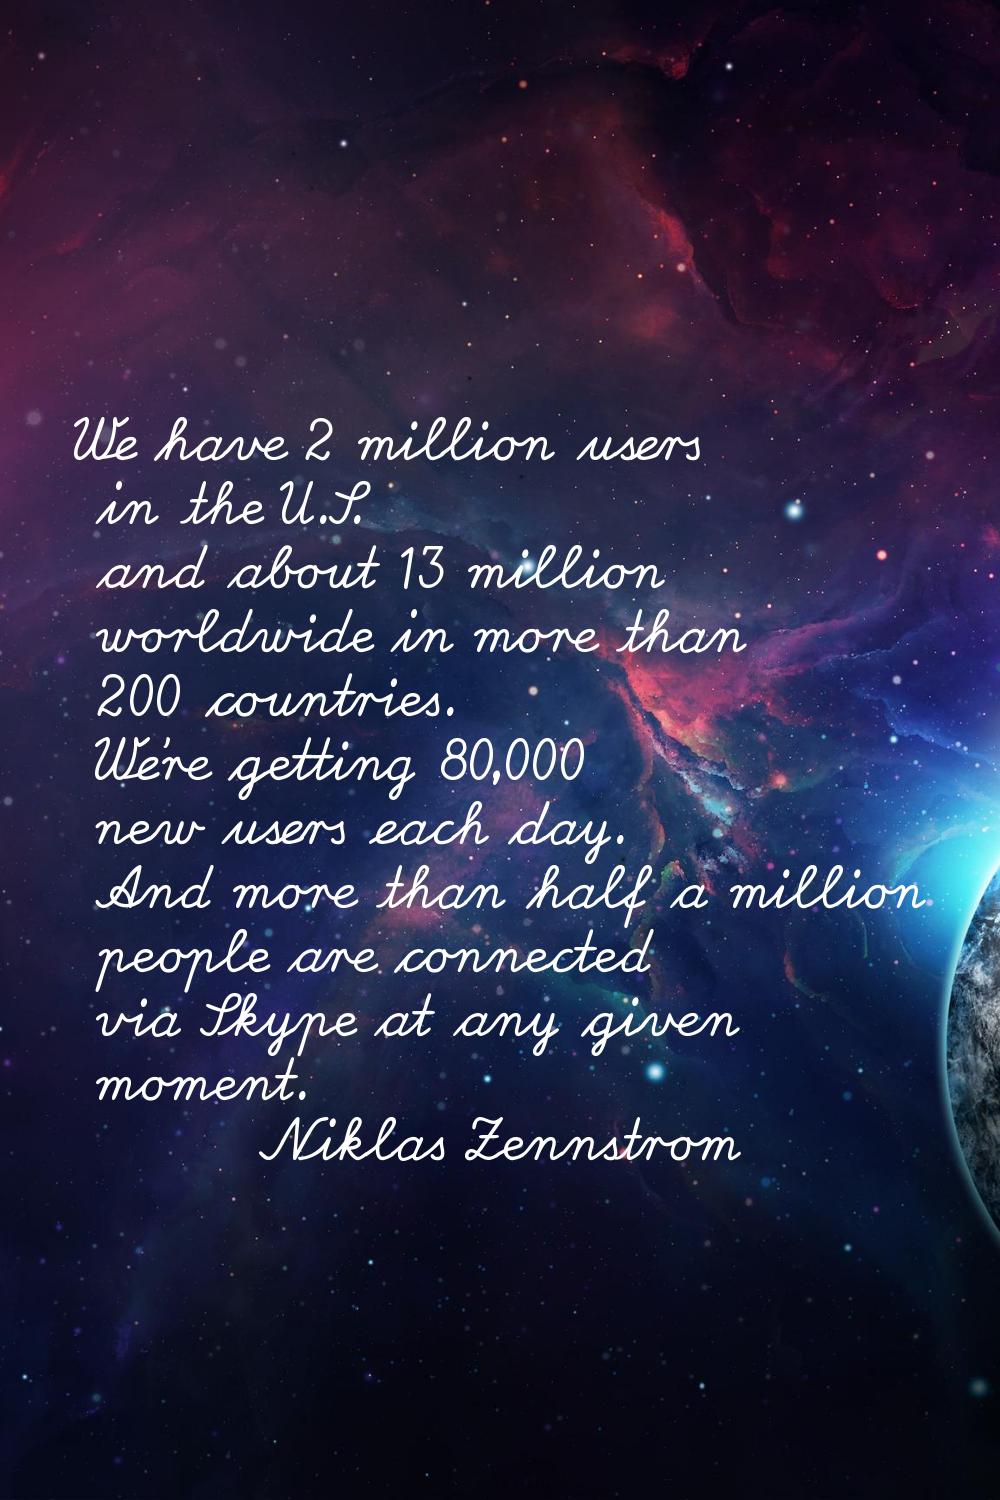 We have 2 million users in the U.S. and about 13 million worldwide in more than 200 countries. We'r